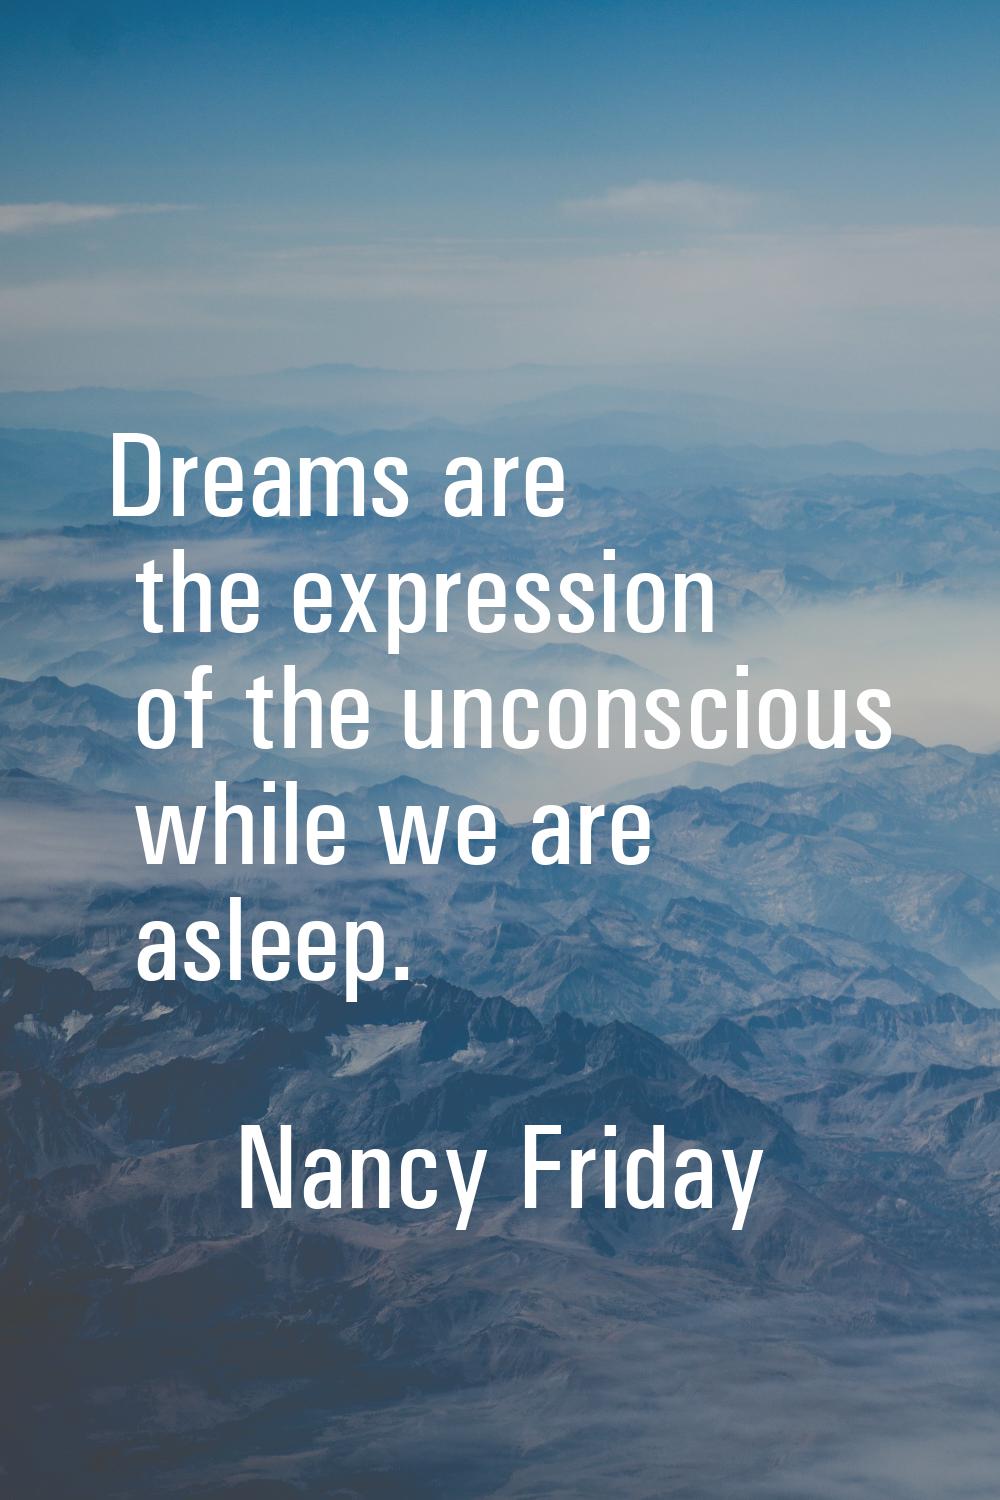 Dreams are the expression of the unconscious while we are asleep.